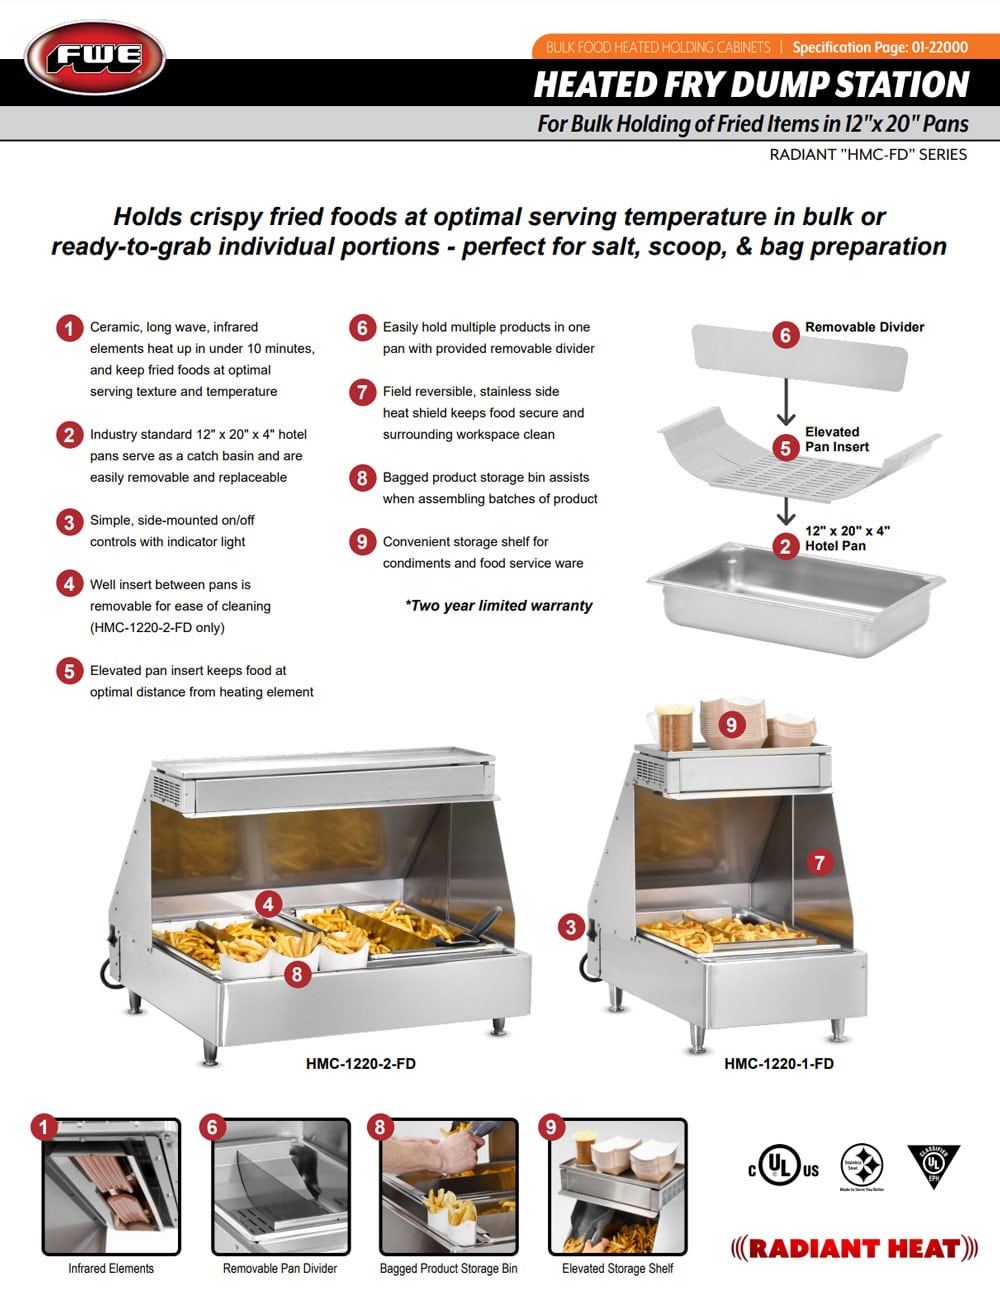 FWE's Heated Fry Dump Station - Specification Sheet